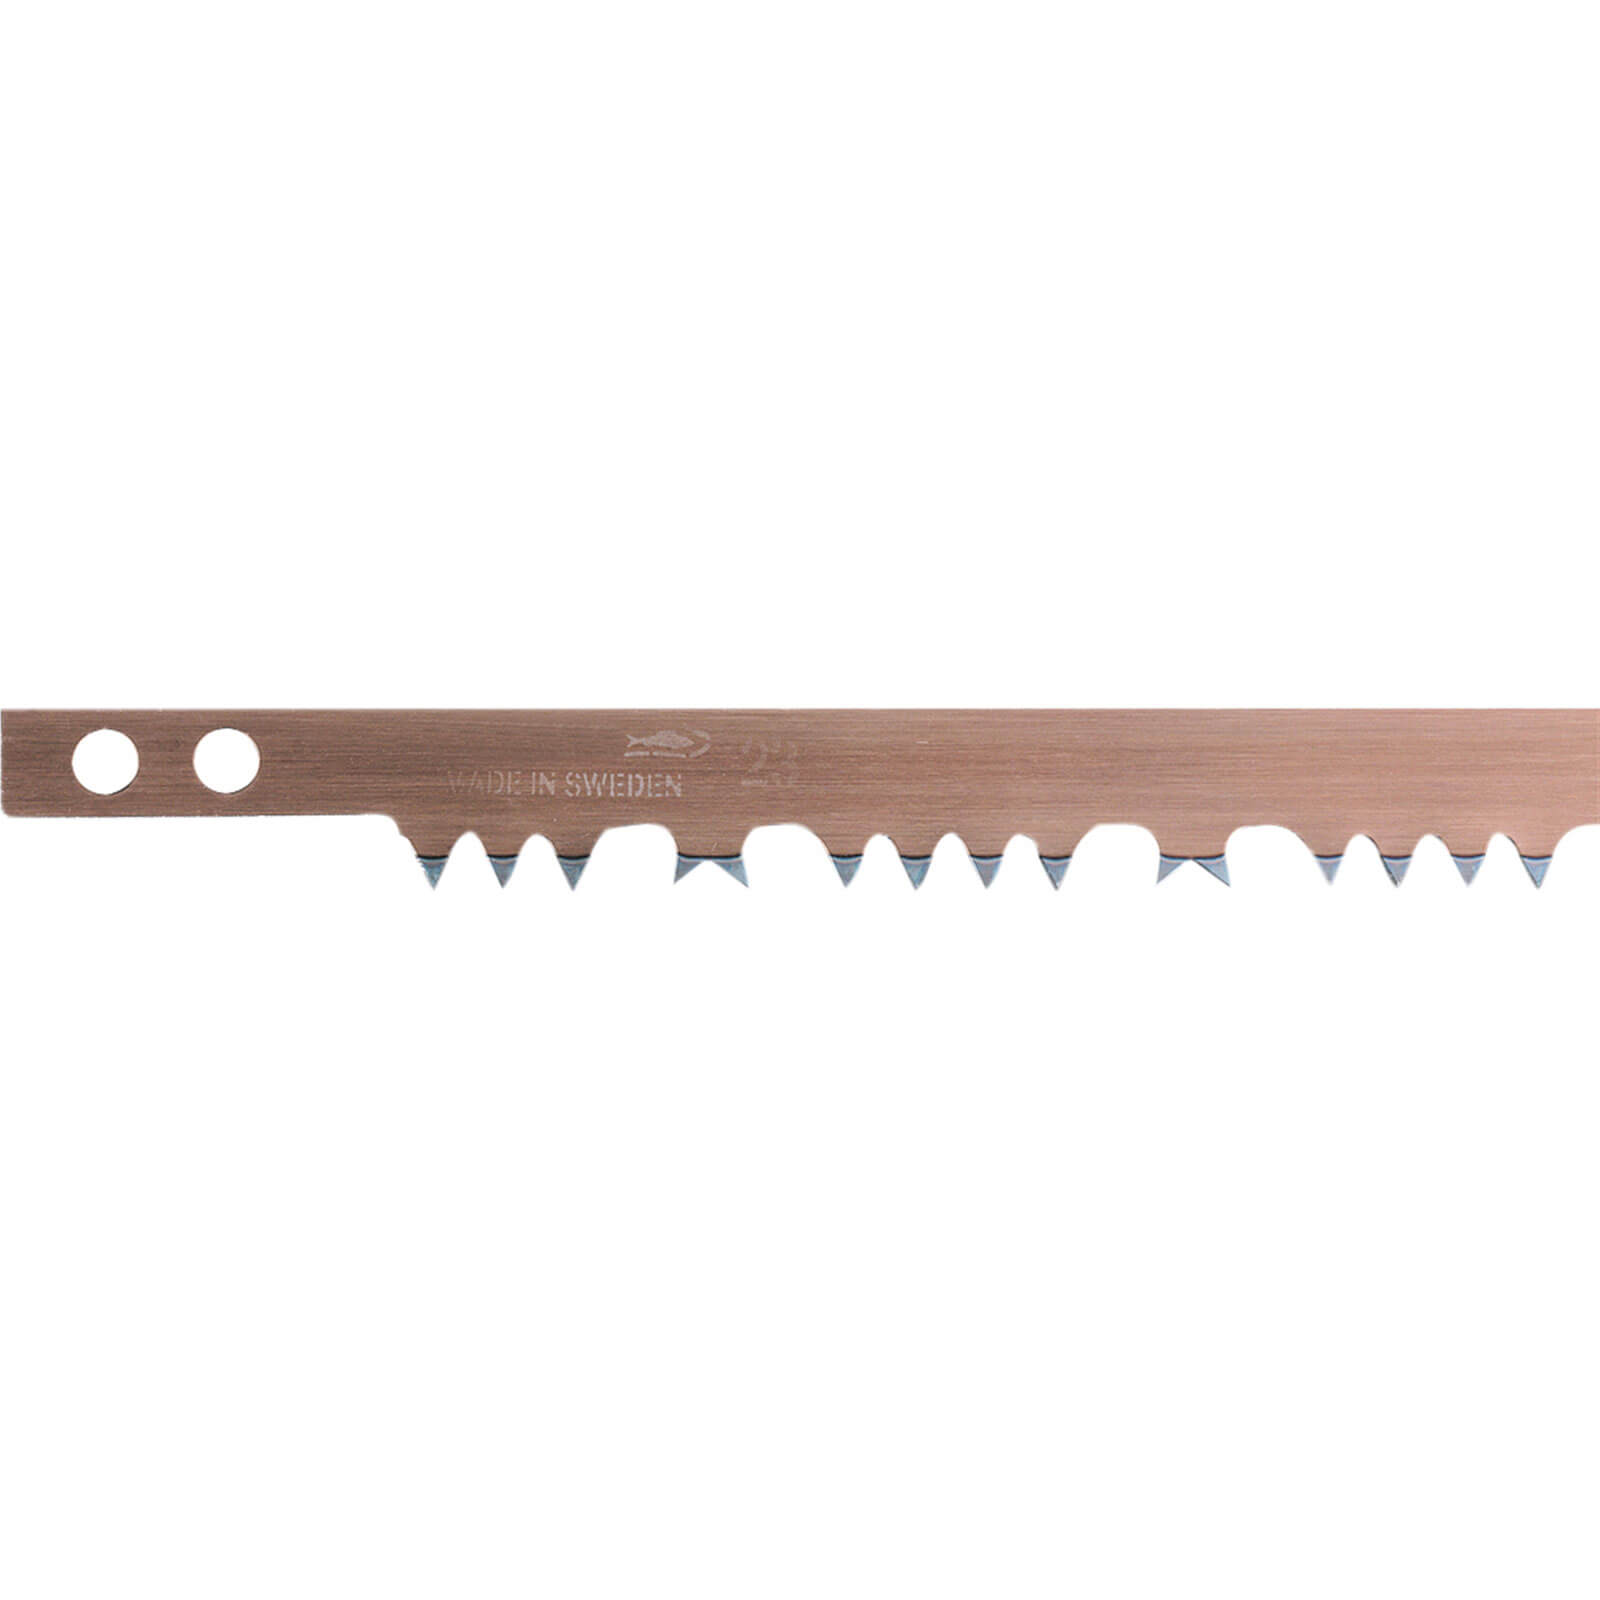 Bahco Raker Tooth Hard Point Bowsaw Blade 36" / 912mm For Green Wood